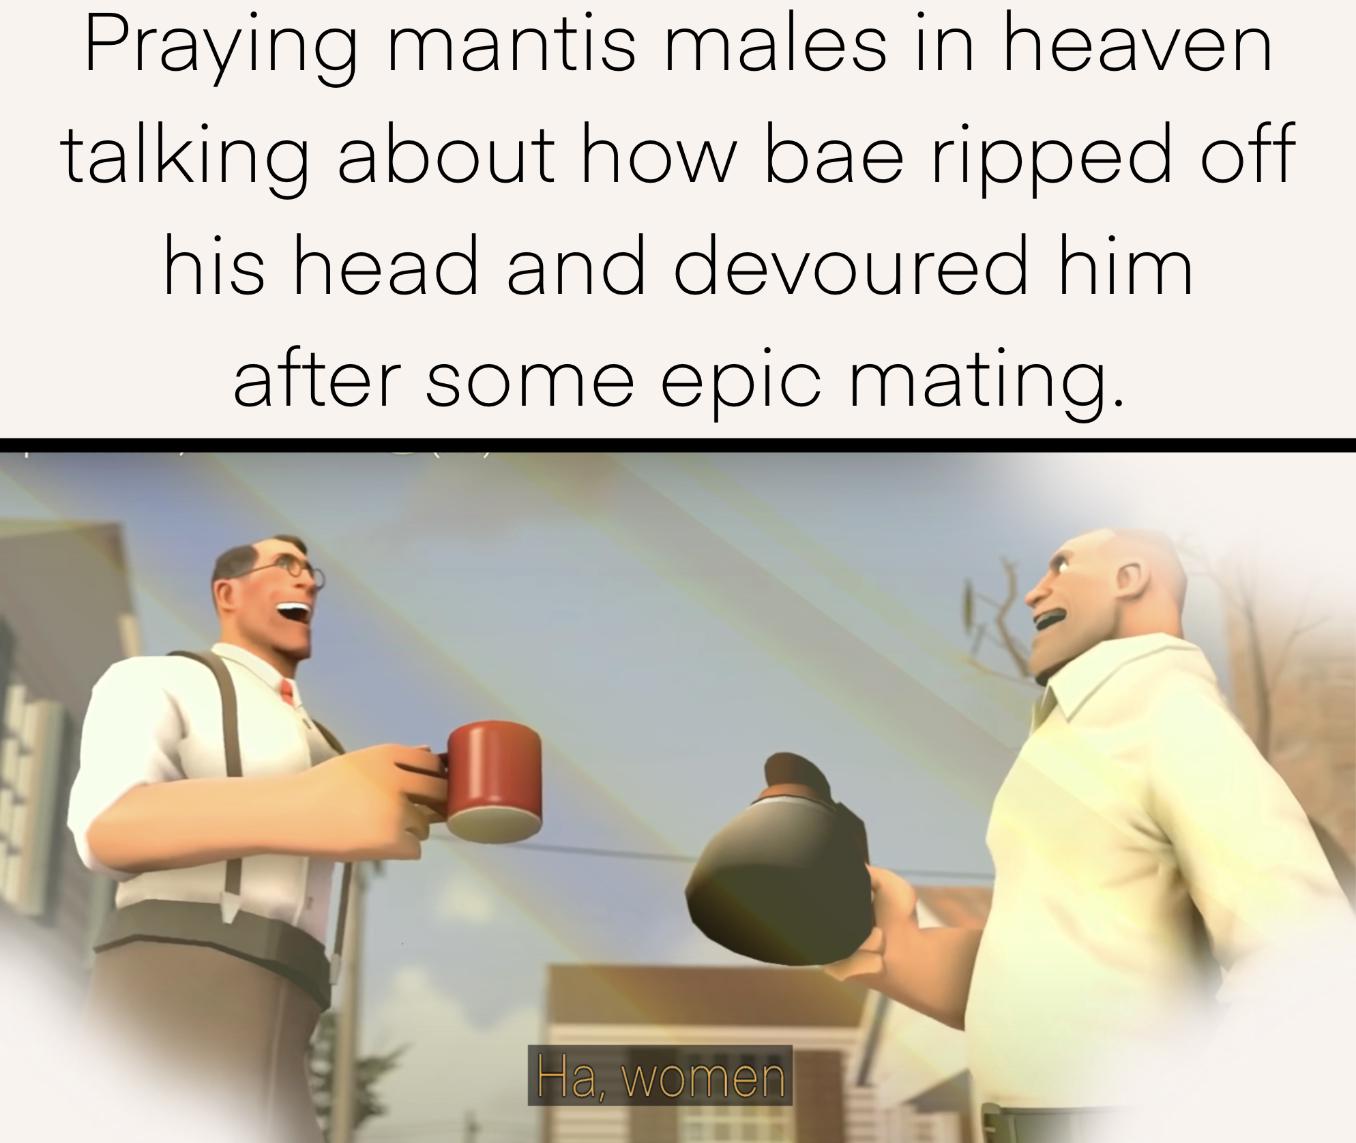 Gaming memes - women hahaha - Praying mantis males in heaven talking about how bae ripped off his head and devoured him after some epic mating. Ha, women